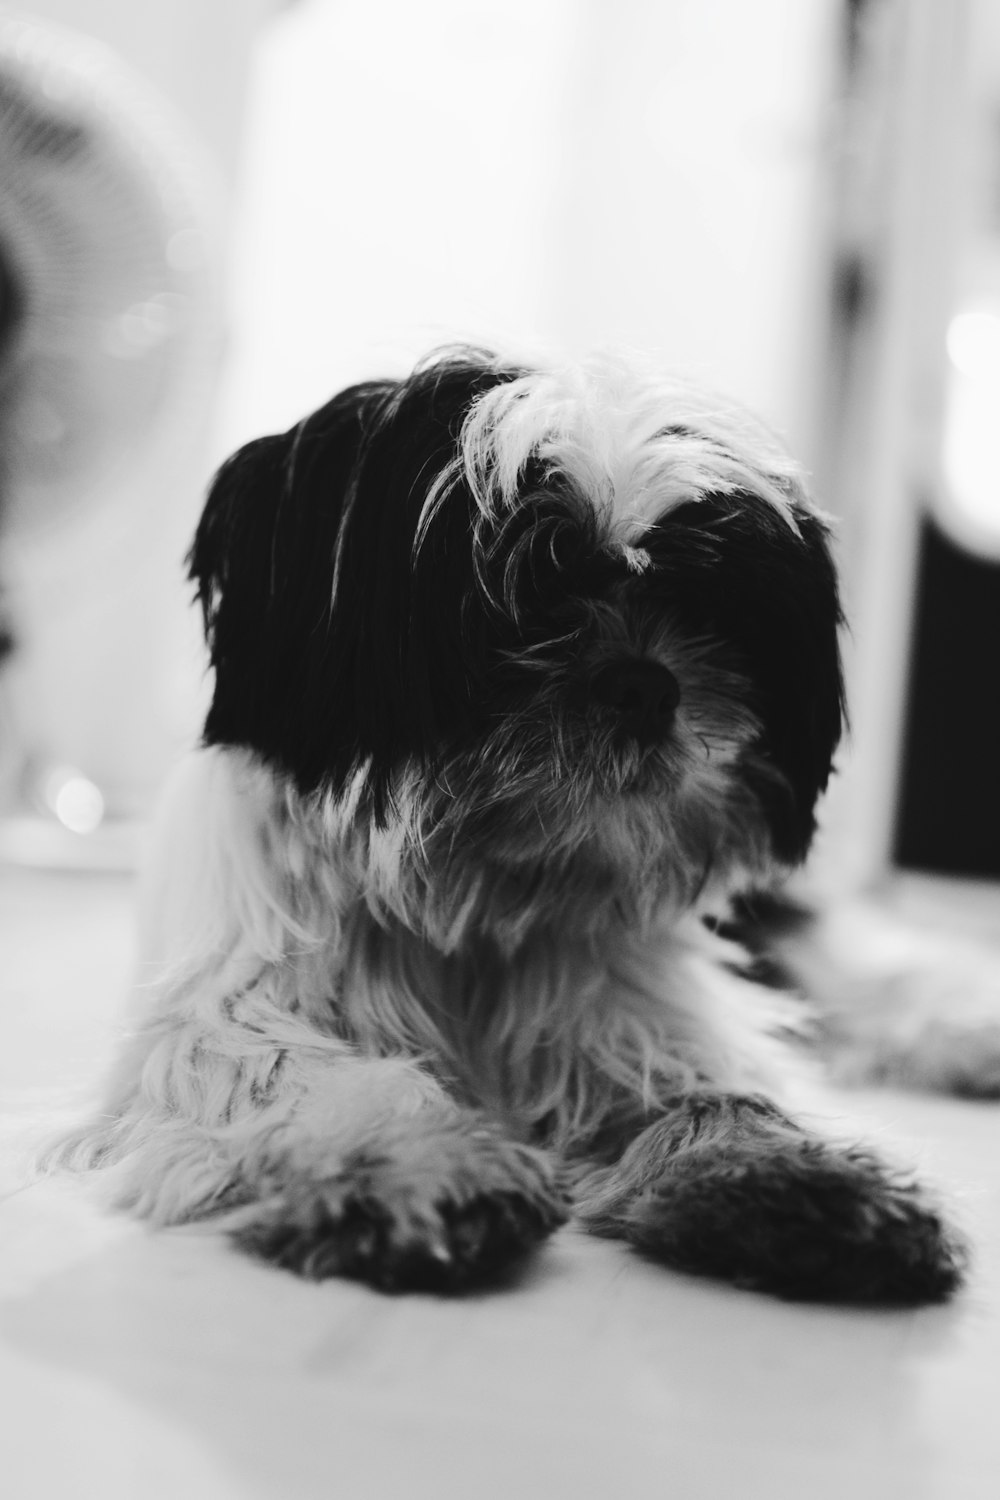 grayscale photograph of dog